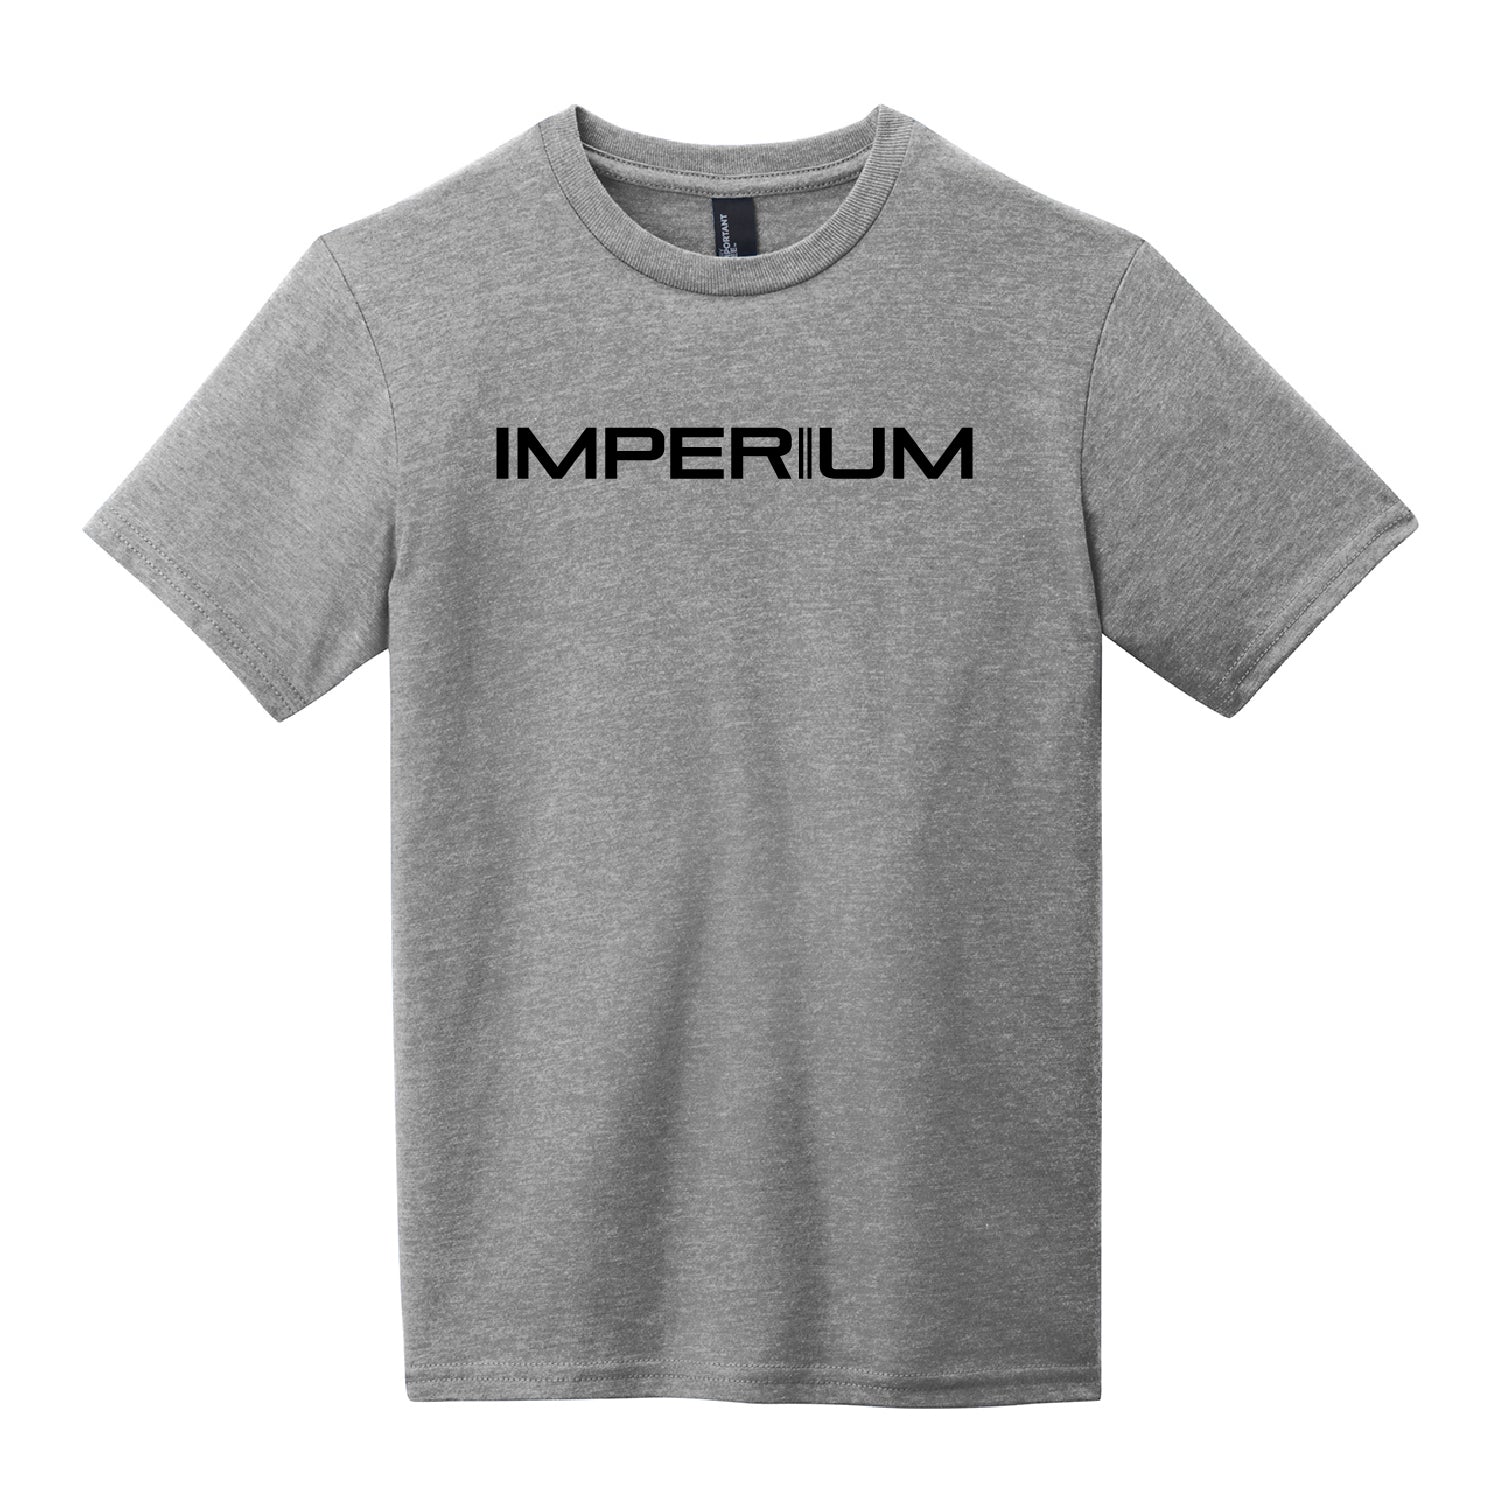 IDC Youth Very Important Tee - DSP On Demand